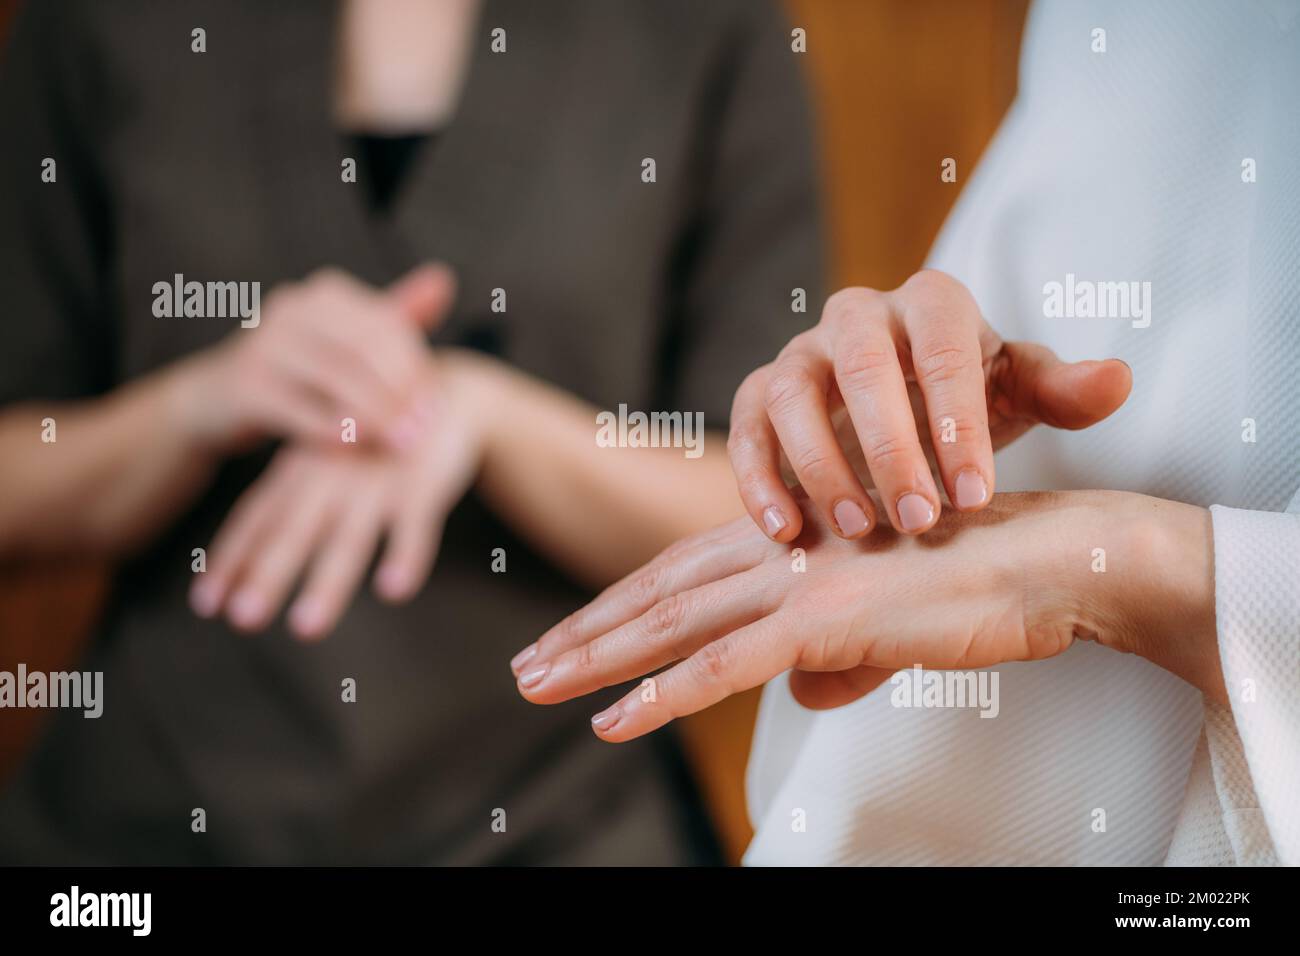 Emotional freedom tapping (EFT) technique. Stock Photo